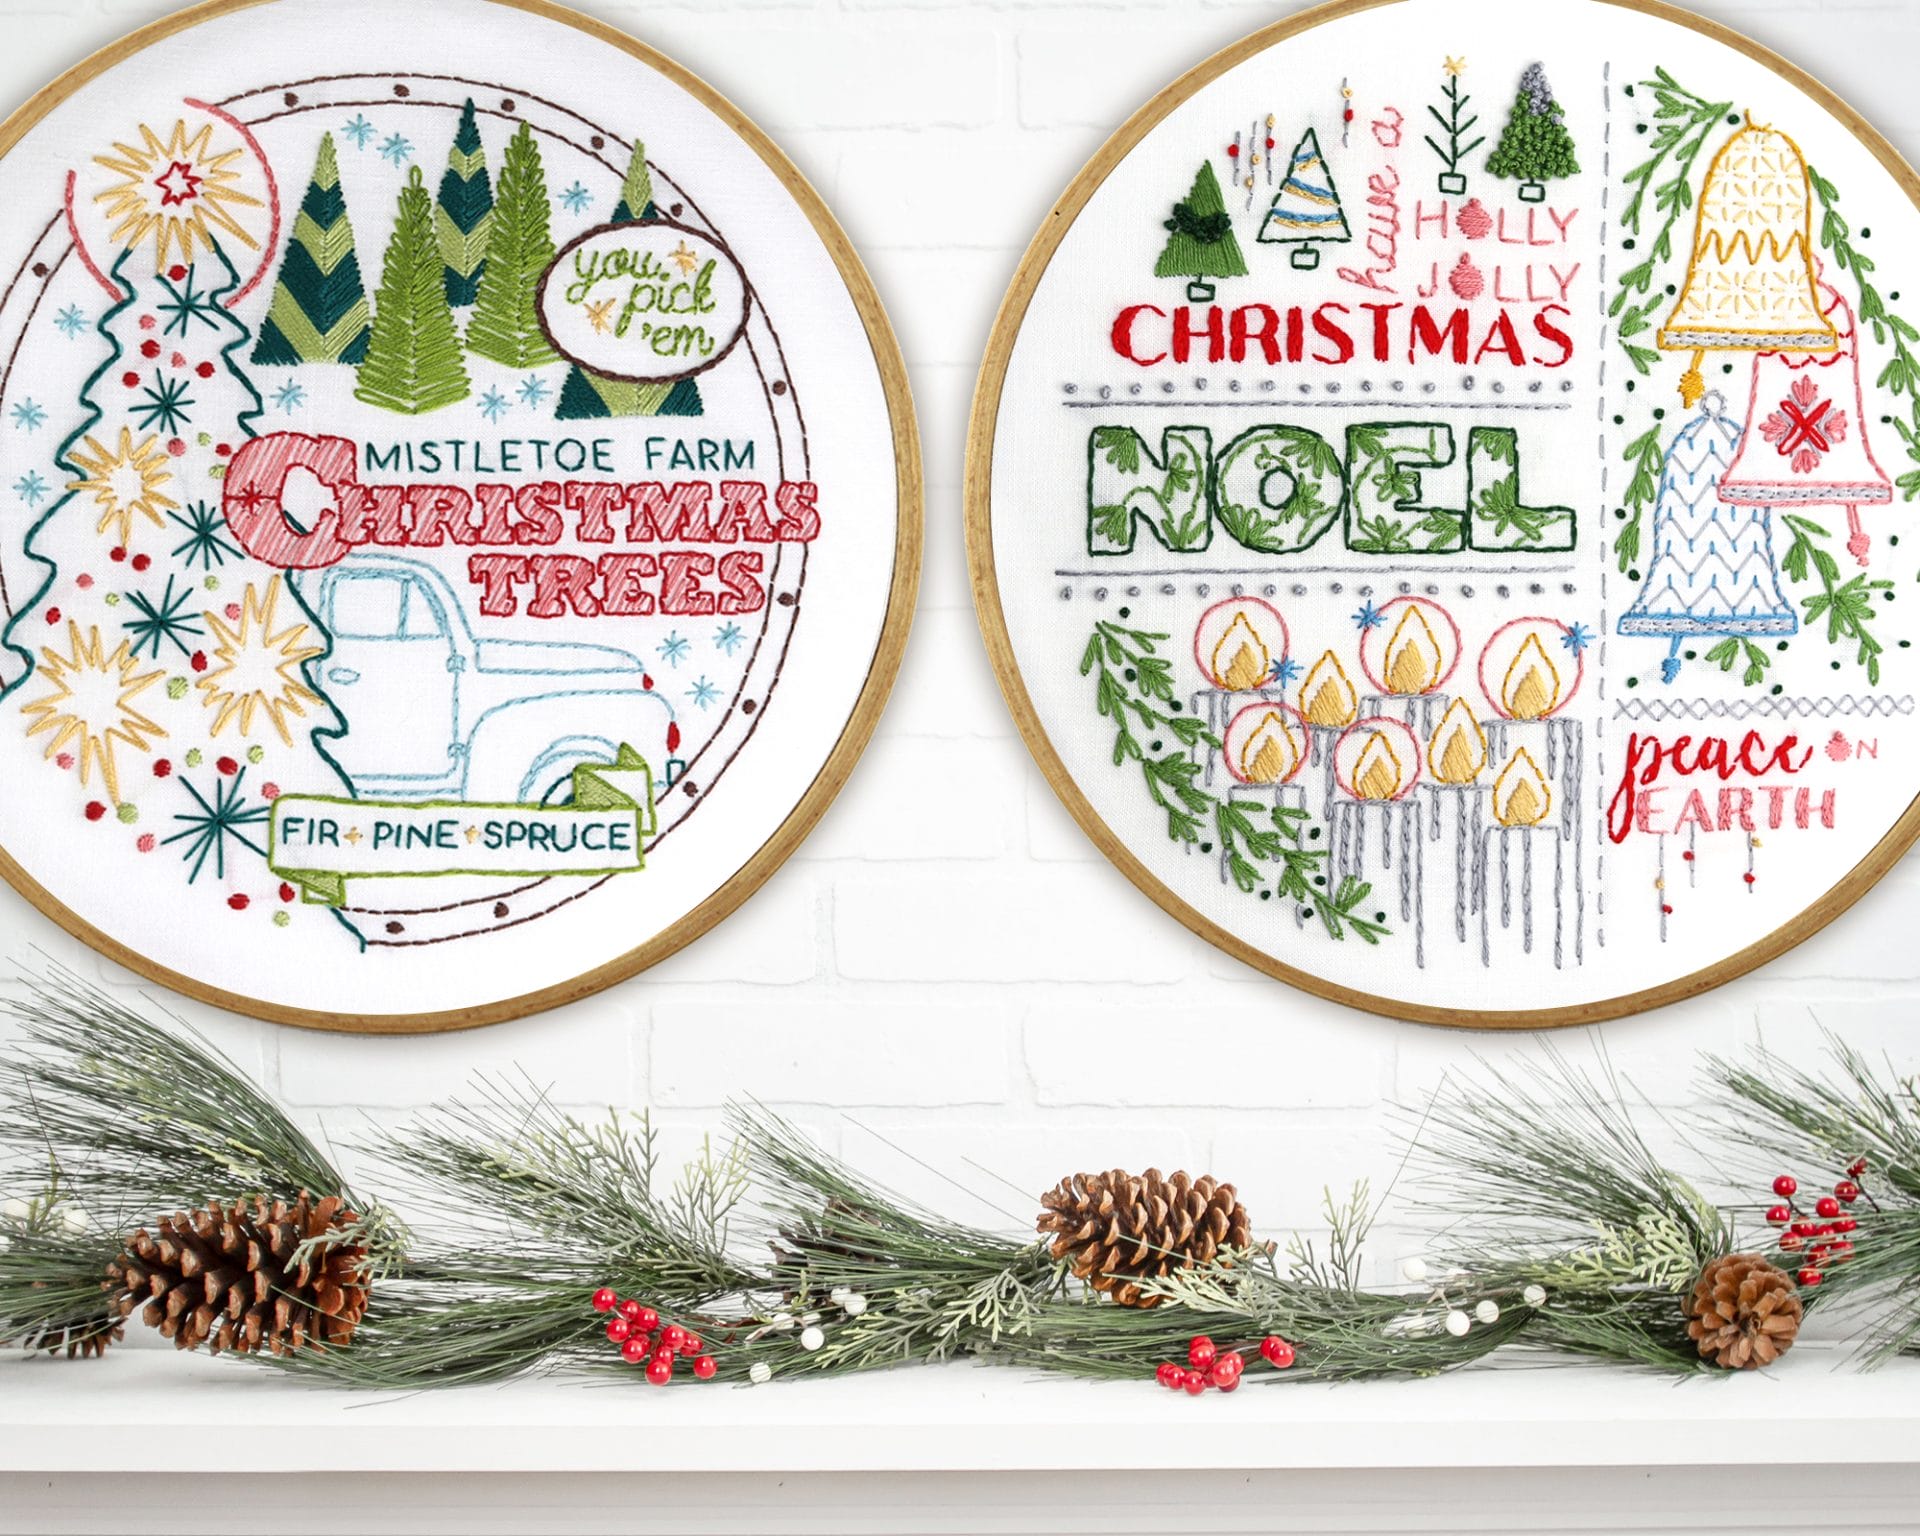 Embroidered hoop art Mistletoe Farm and Noel displayed above a pine-covered mantle.